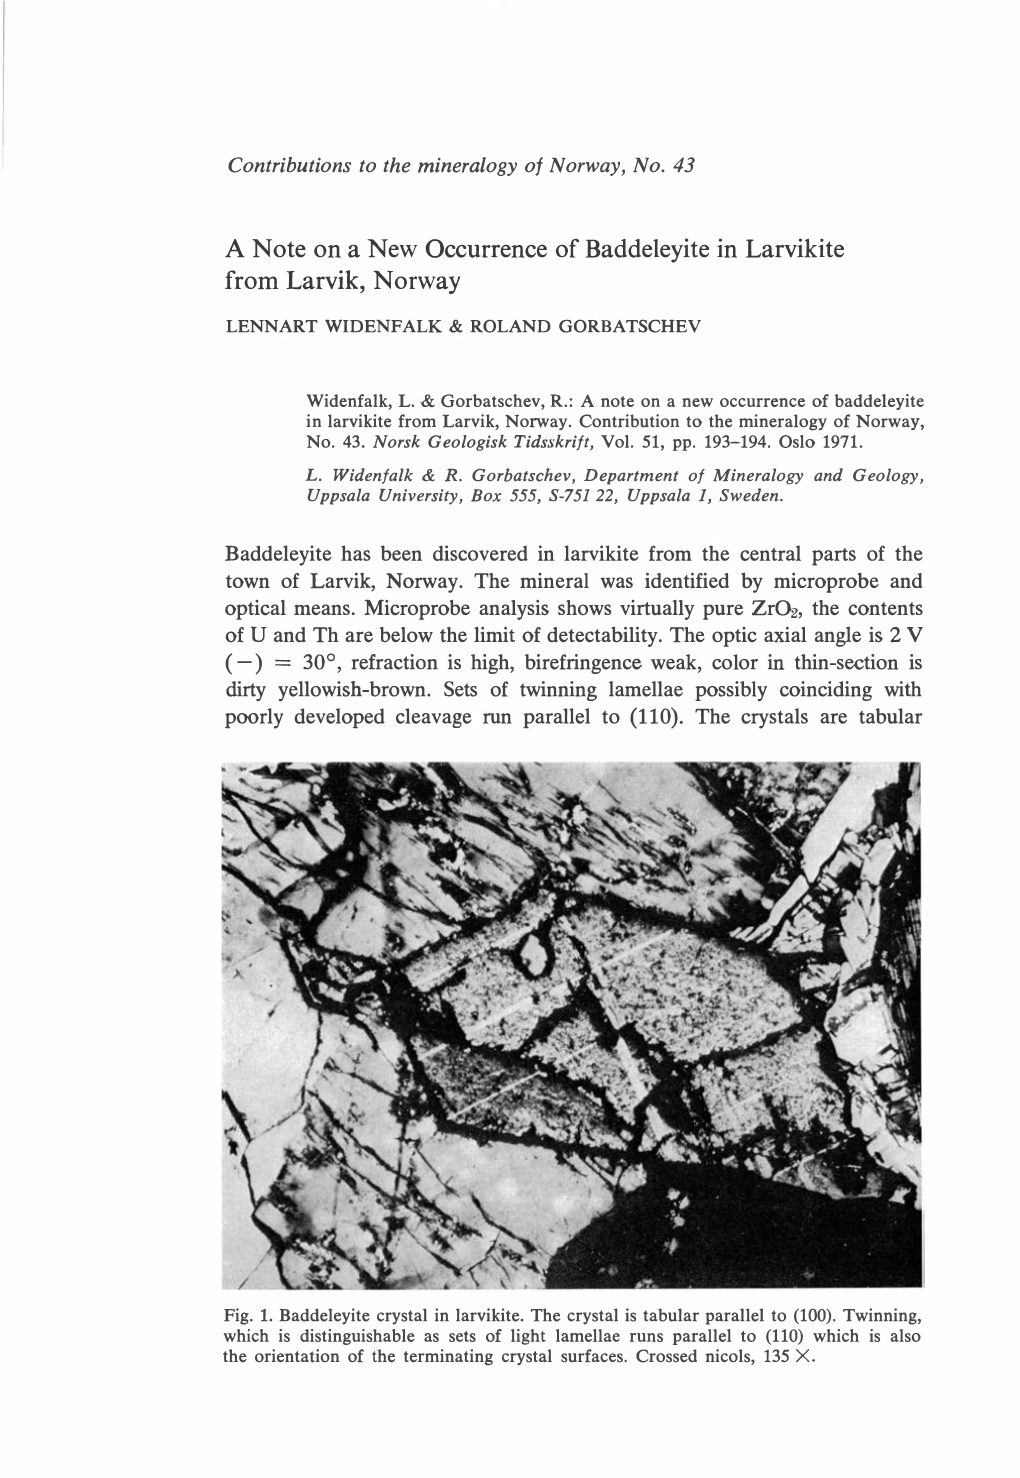 Contributions to the Mineralogy of Norway, No. 43 a Note on a New